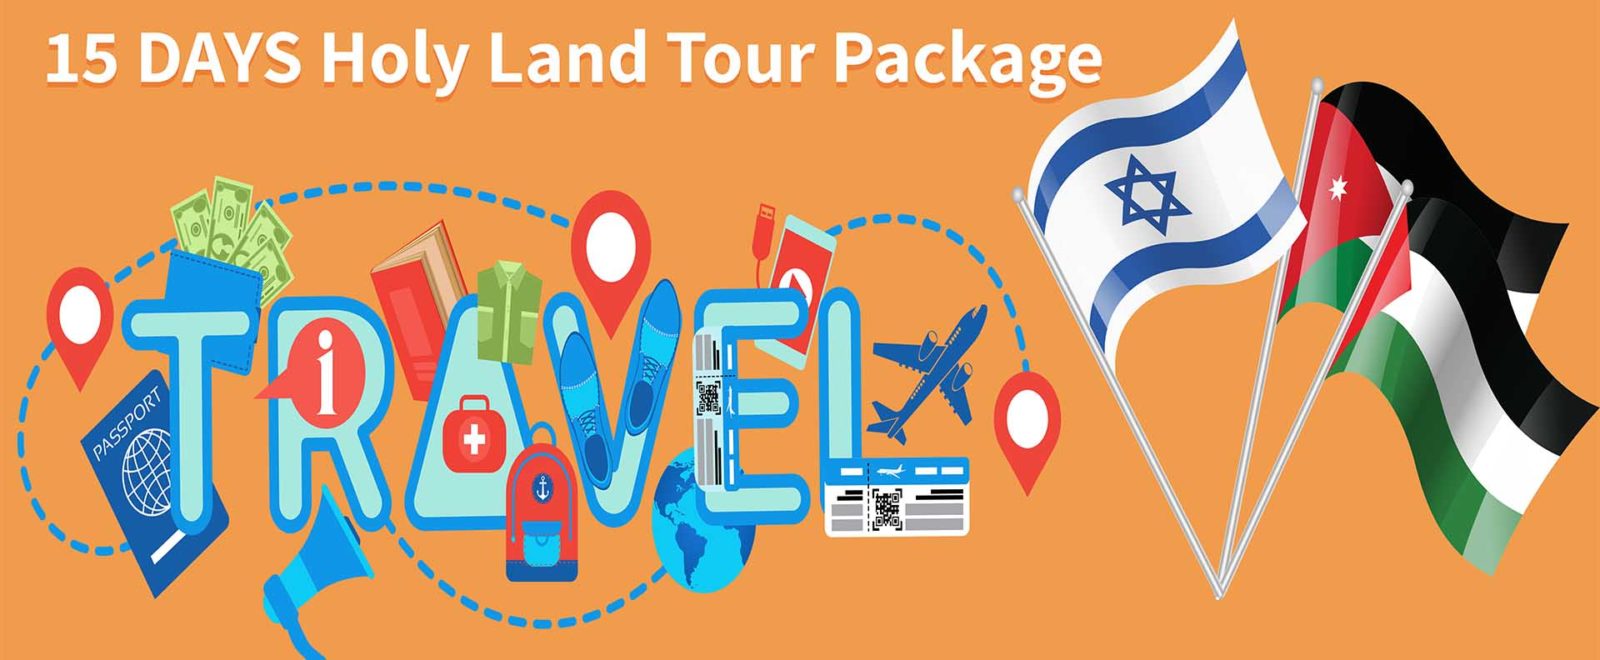 Israel, Palestine and Jordan in 15 Days Holy Land Tour Package